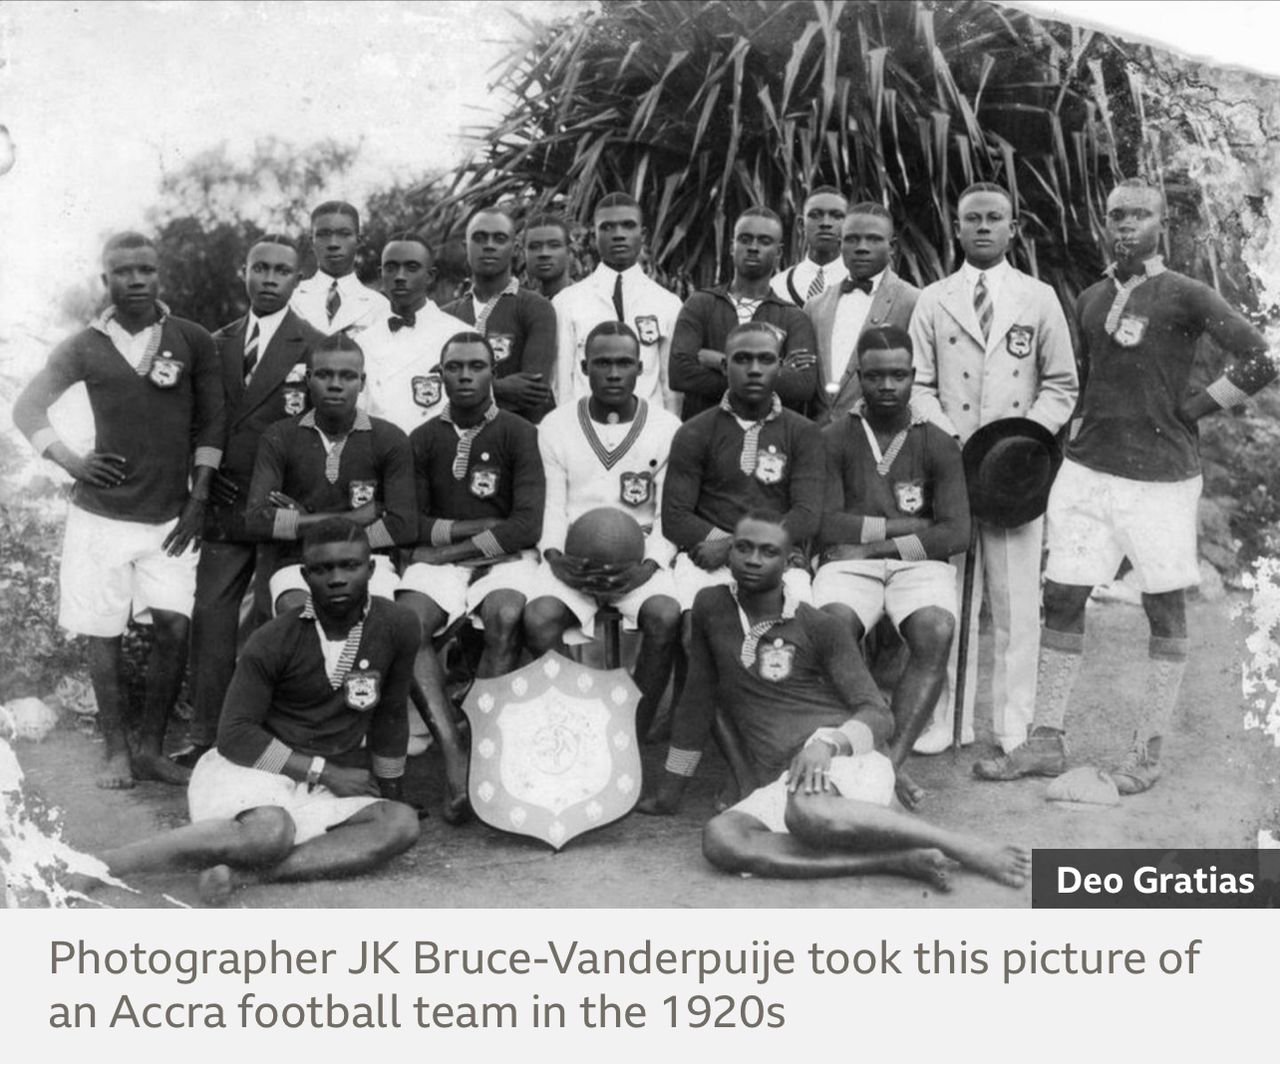 Photographer JK Bruce-Vanderpuije took this picture of an Accra football team in the 1920s